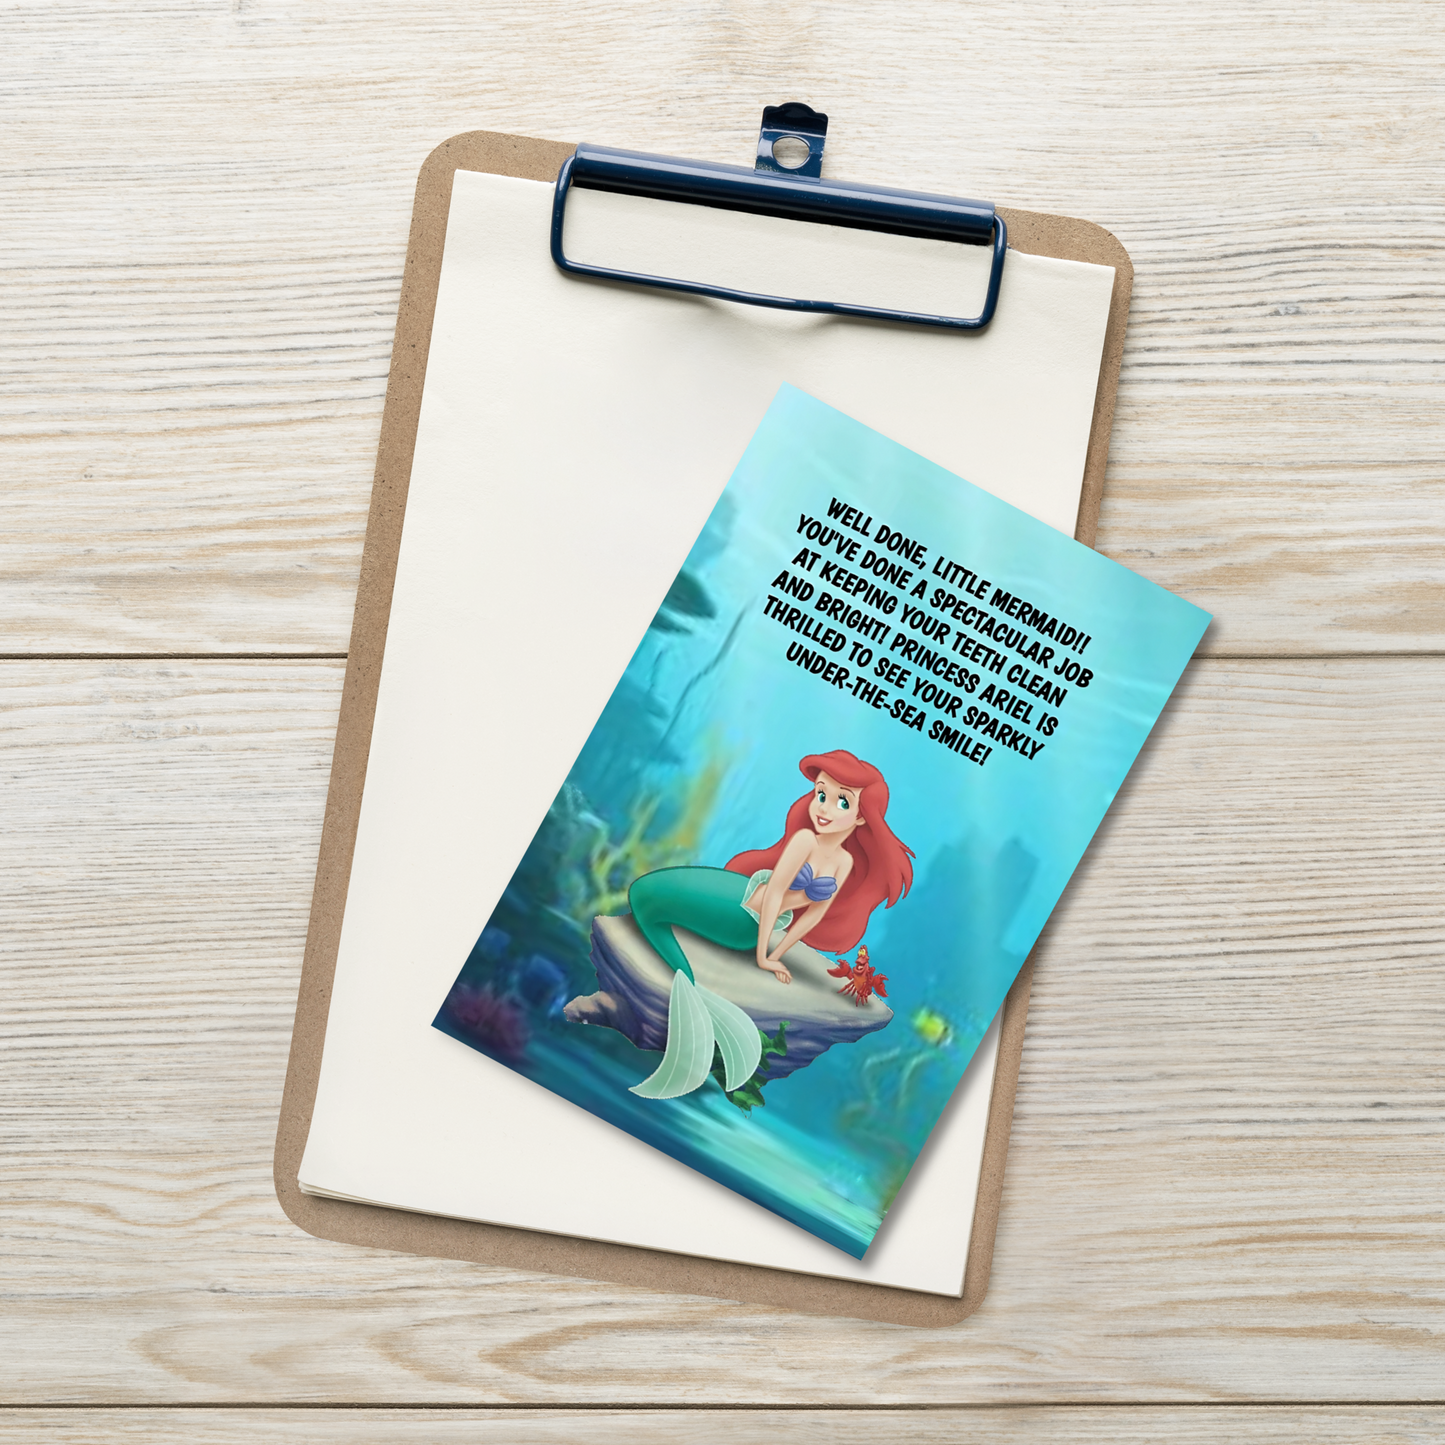 Dental Motivational & Reward Cards- Well Done, Little Mermaid!! You've Done A Spectacular Job At Keeping Your Teeth Clean And Bright!